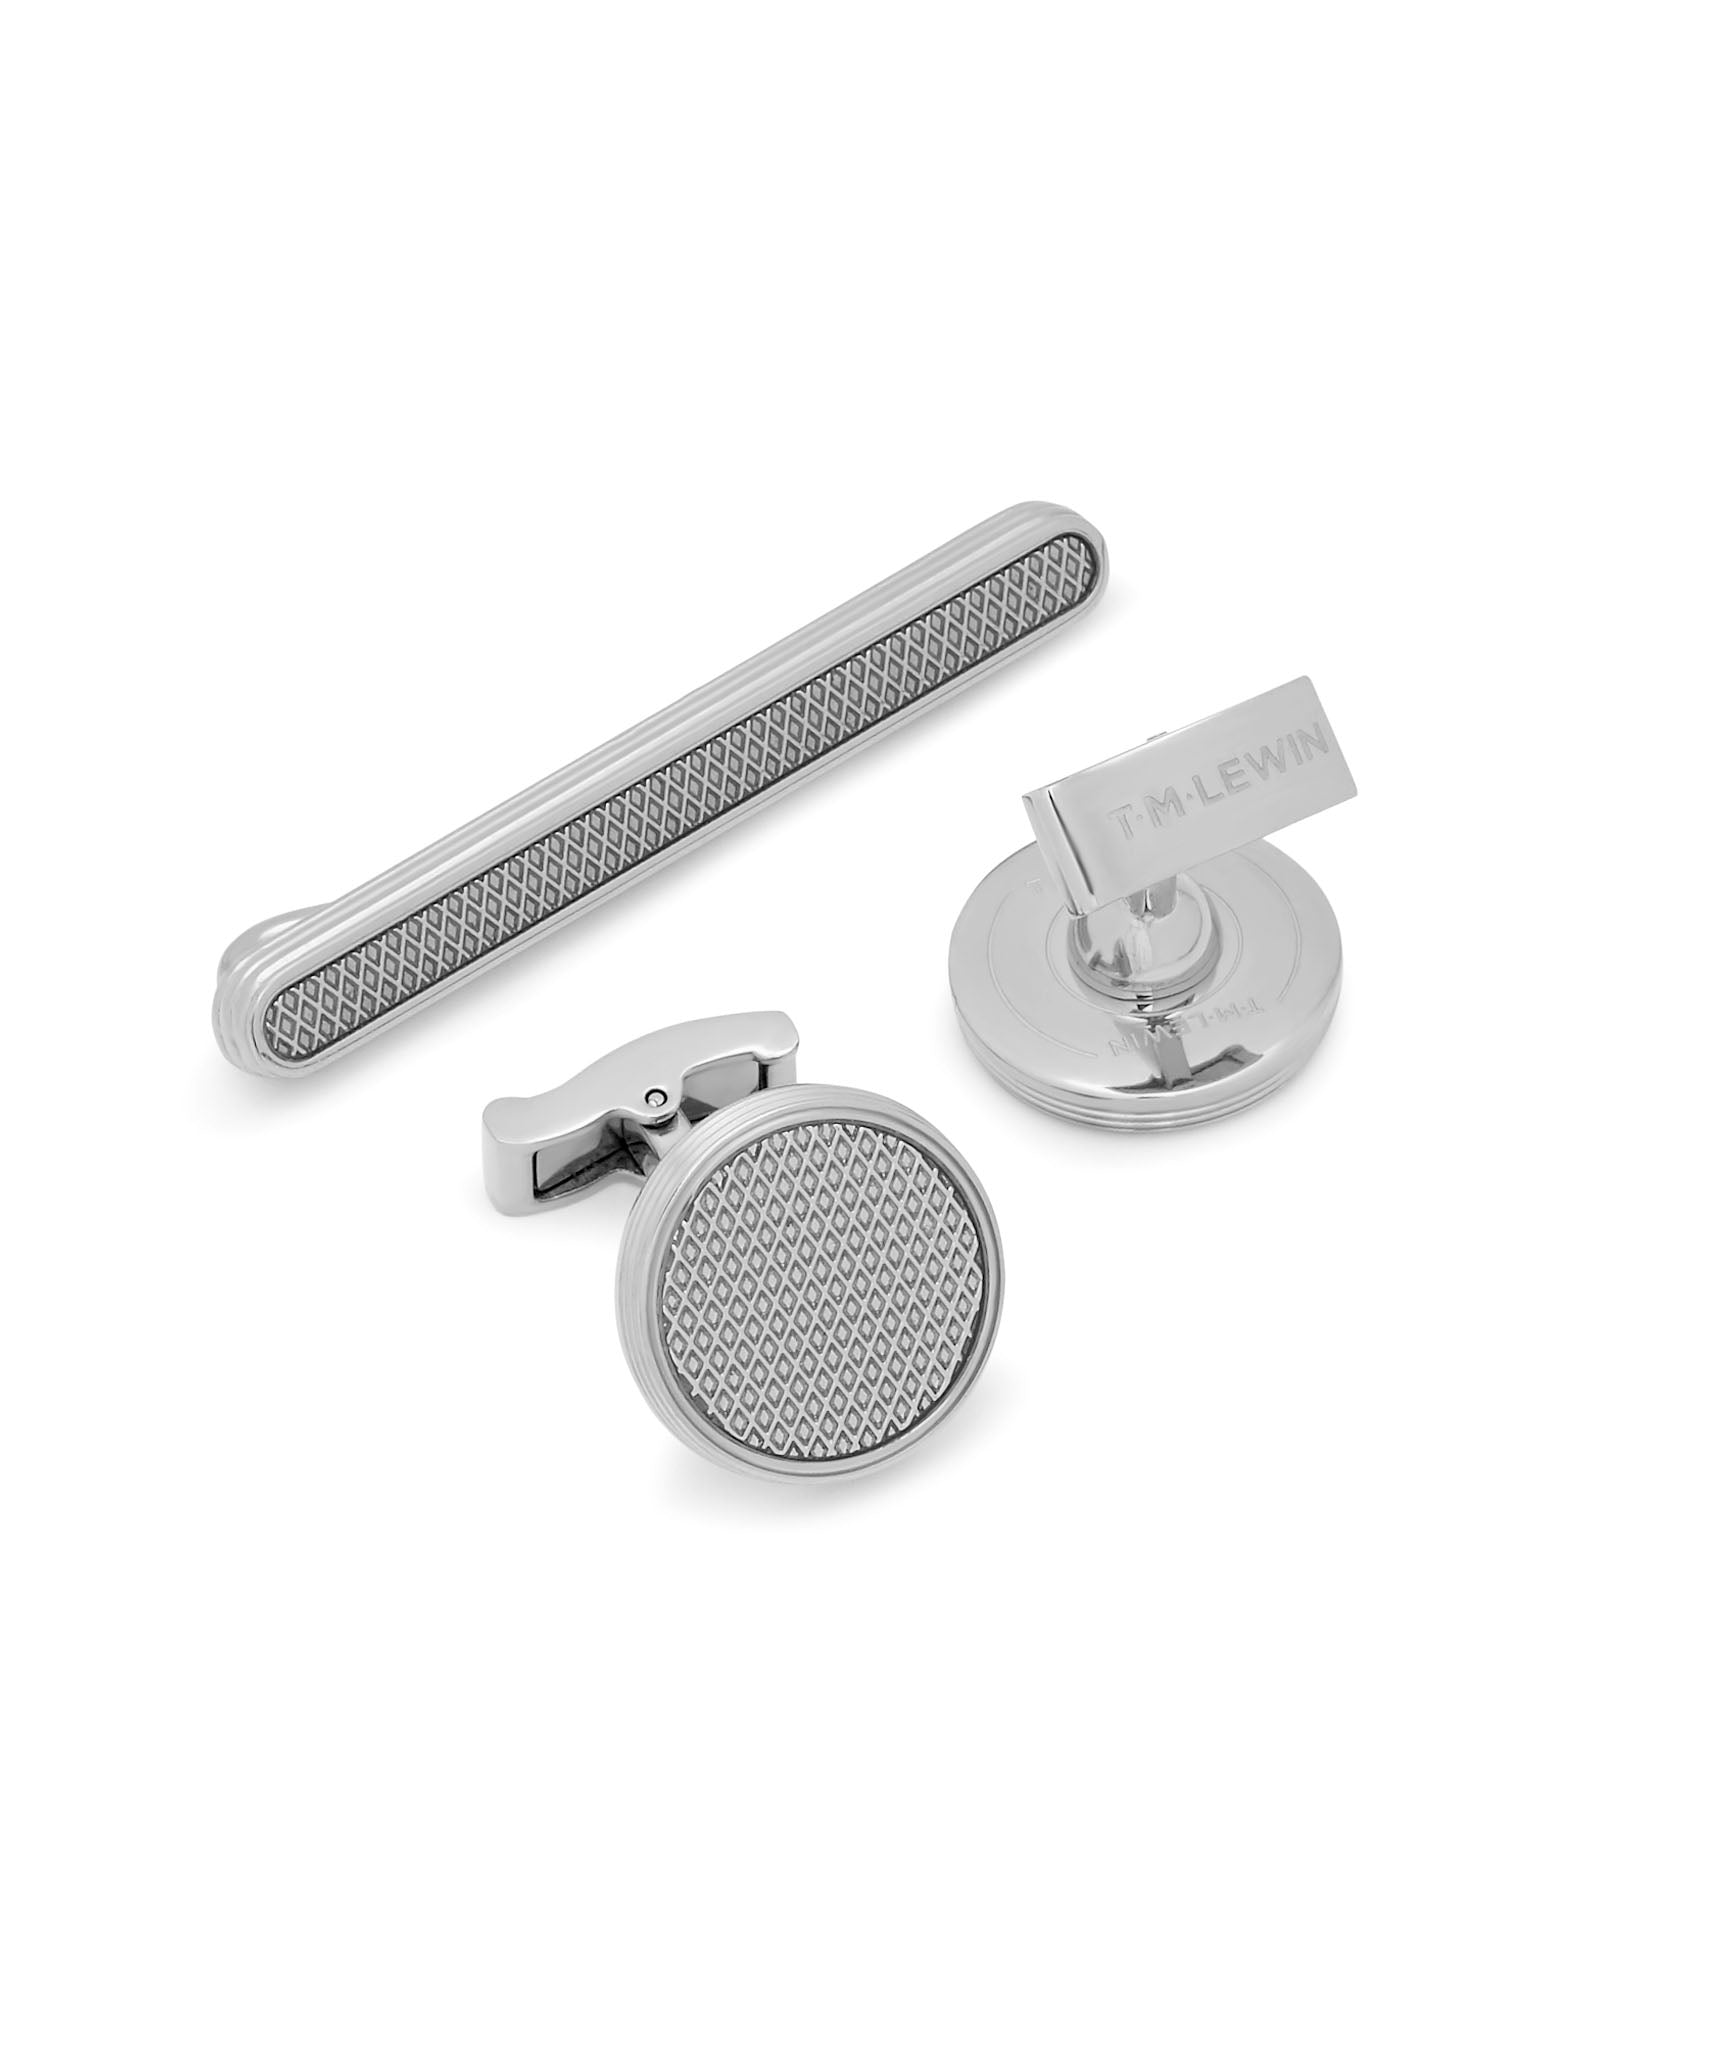 Image 2 of Luxury Silver Cufflink and Tie Bar Gift Set